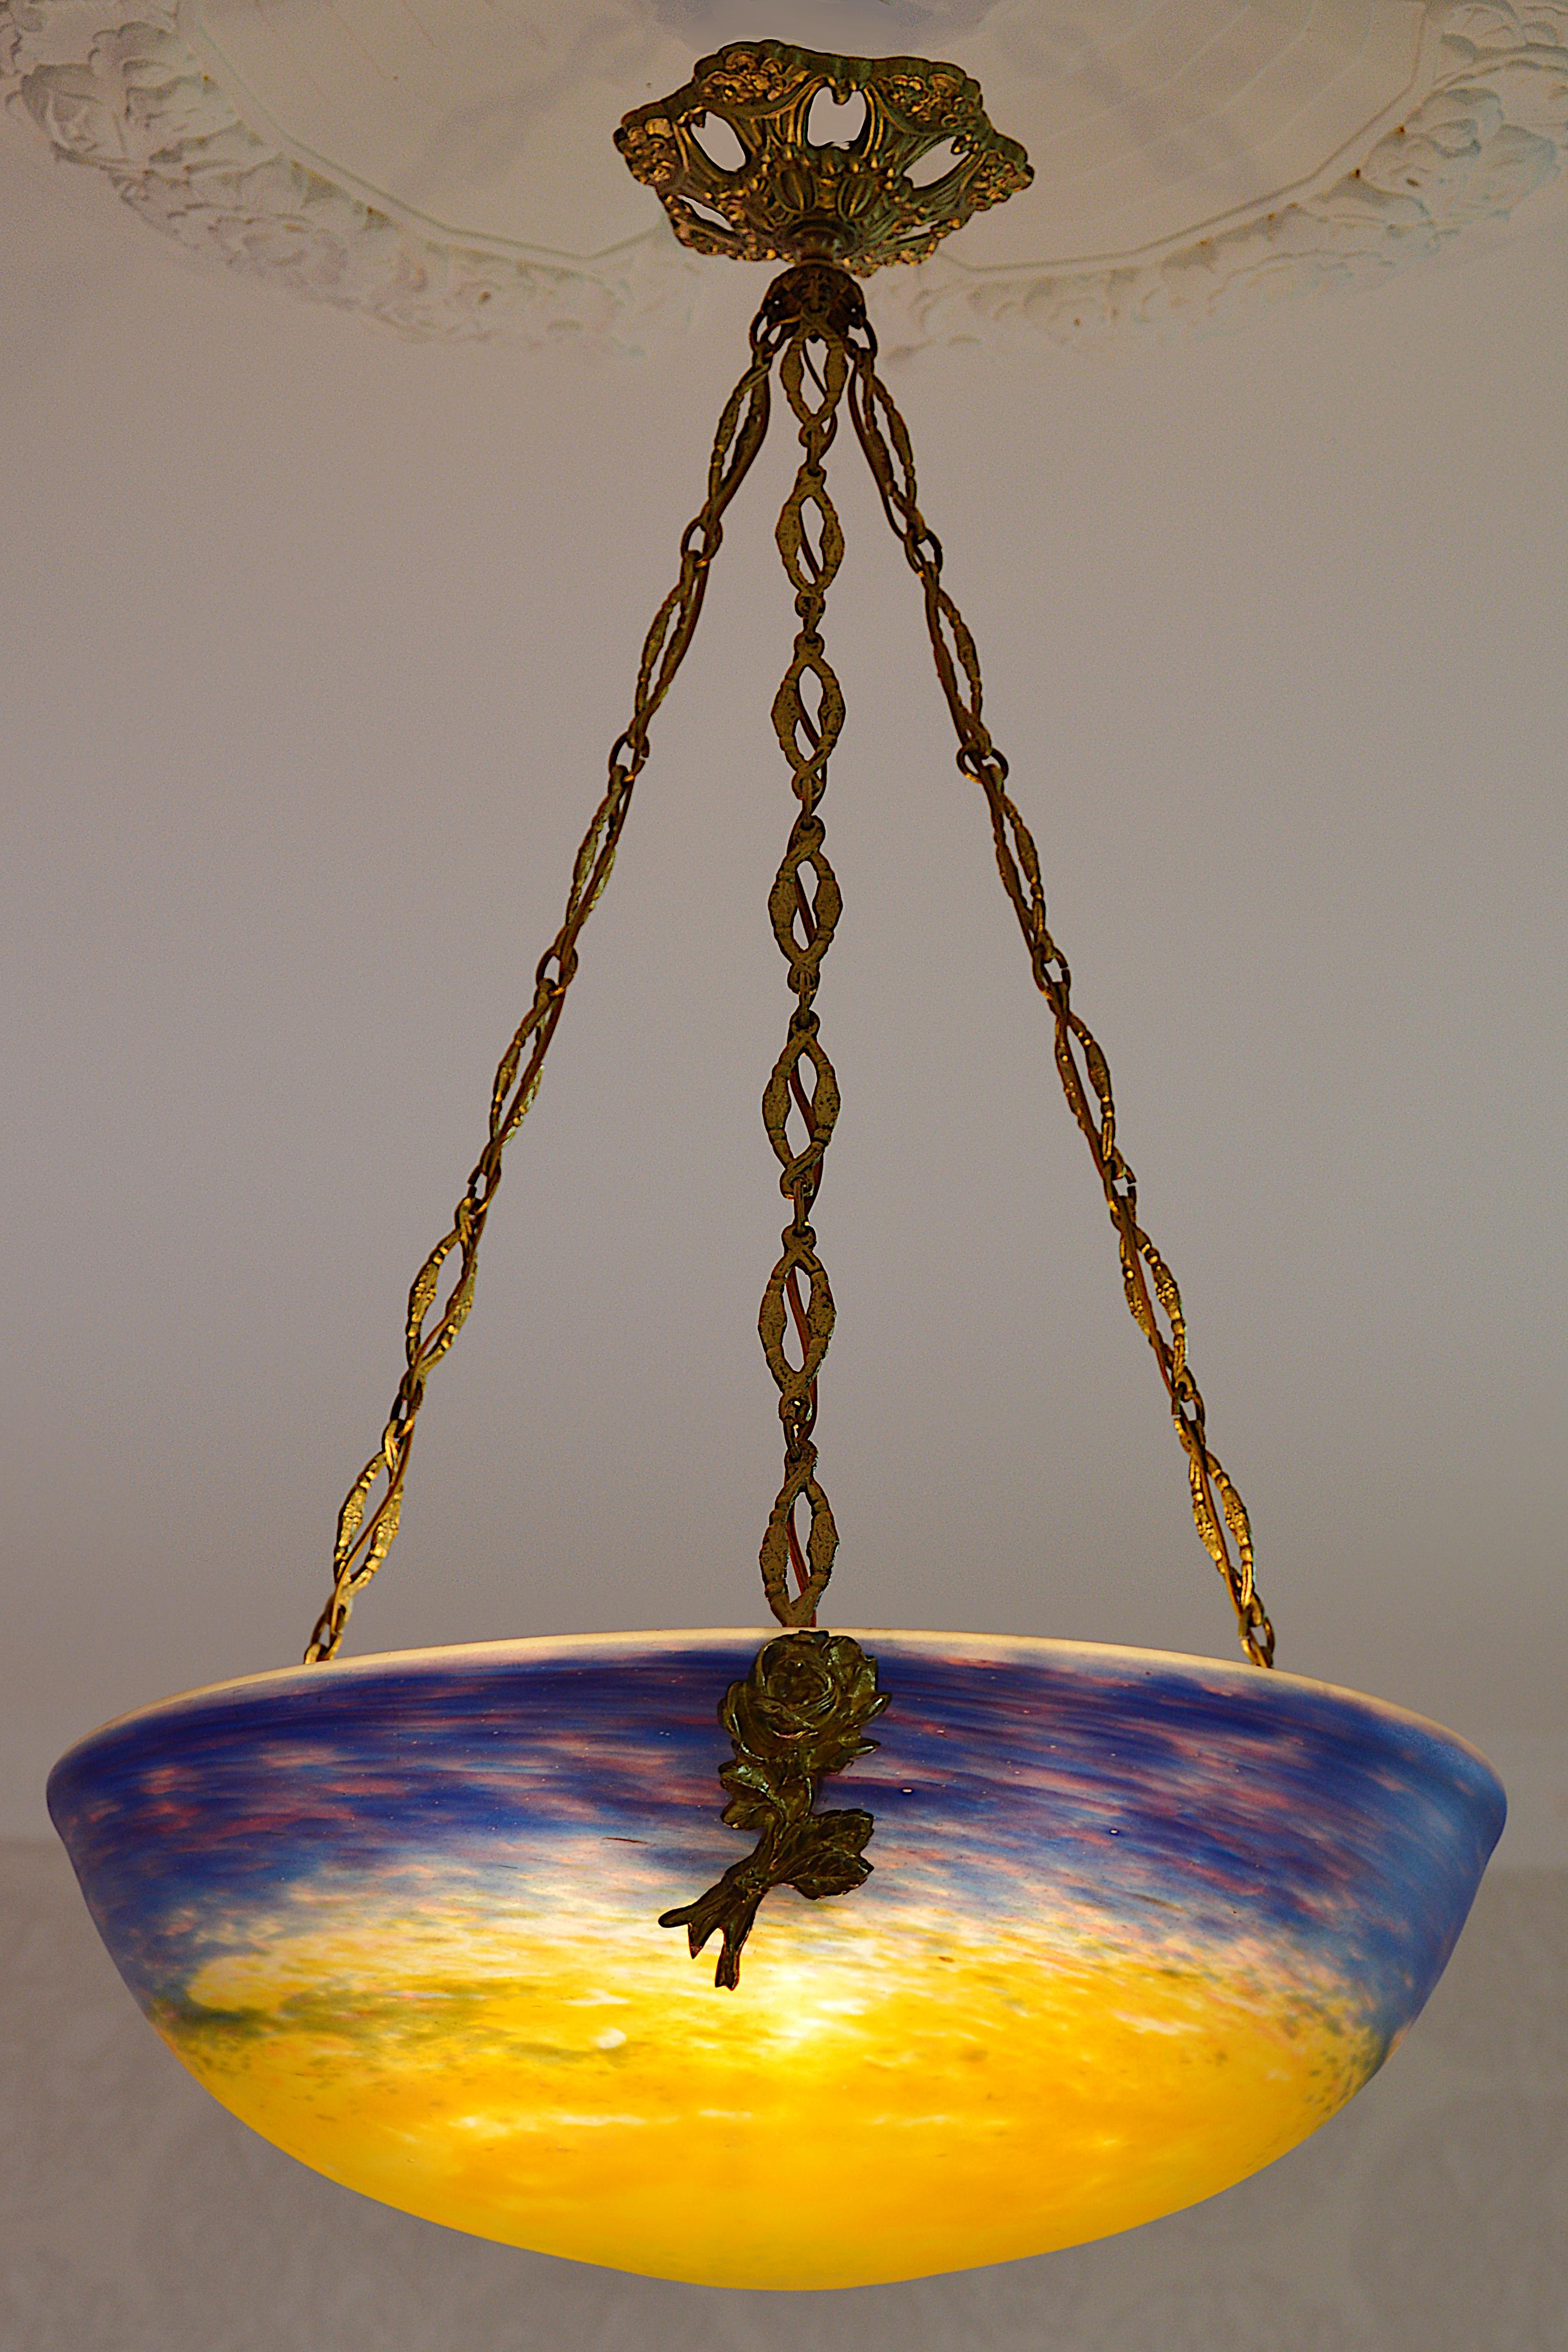 French Art Deco pendant by Muller Freres, Luneville, France, Early 1920s. Mottled glass shade, powders are applied between two layers that comes hung at its original solid bronze fixture by Charles RANC (Paris). Measures: Height 25.6